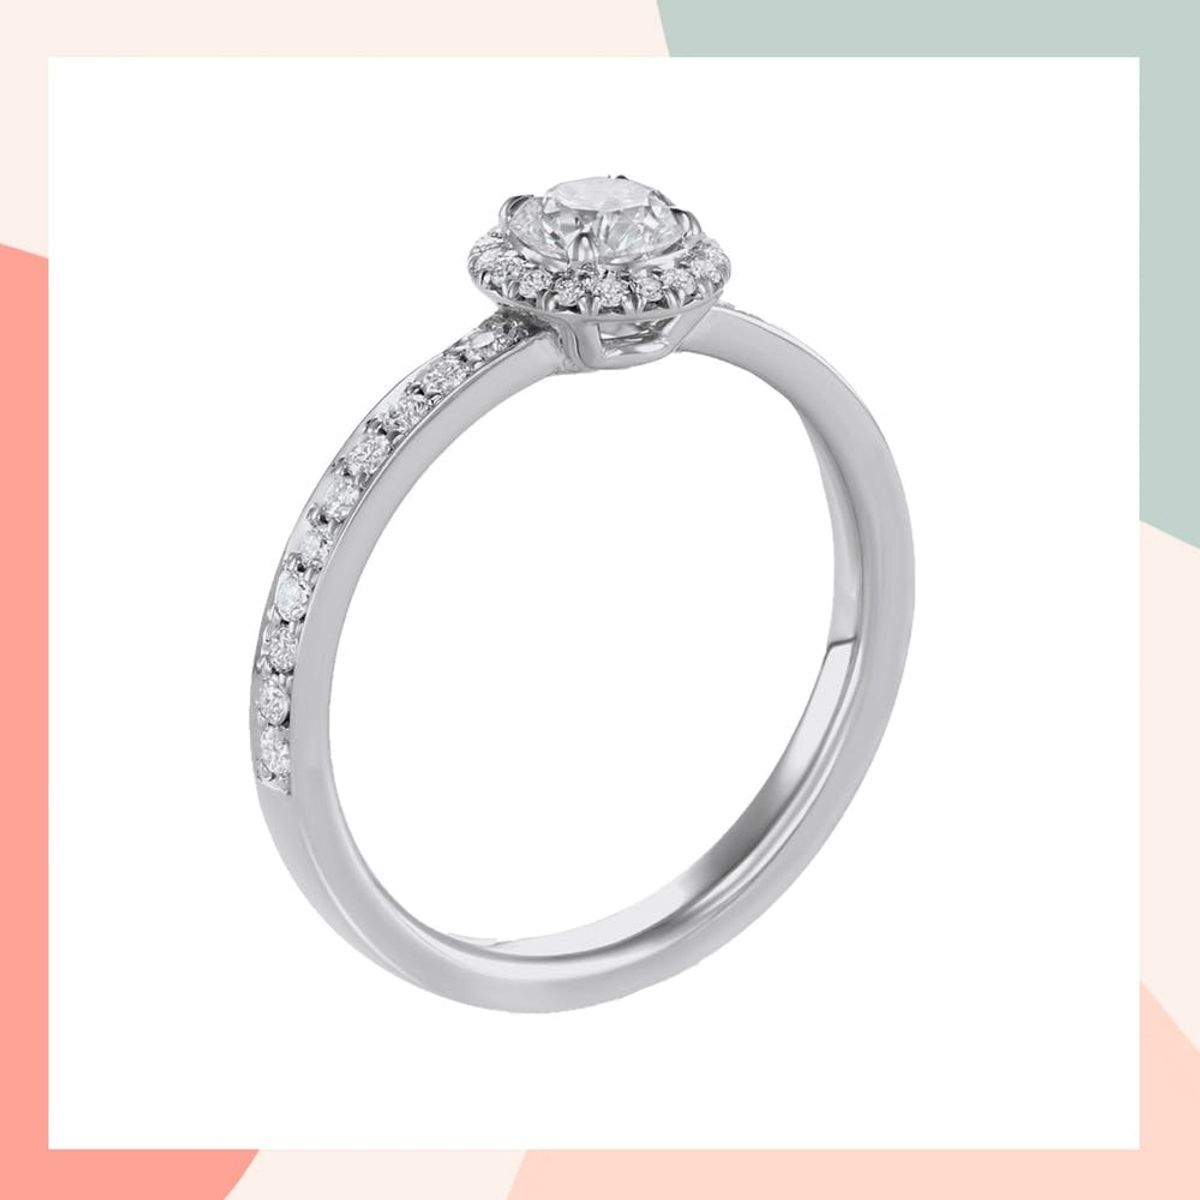 How to Create the Custom Engagement Ring of Your Dreams